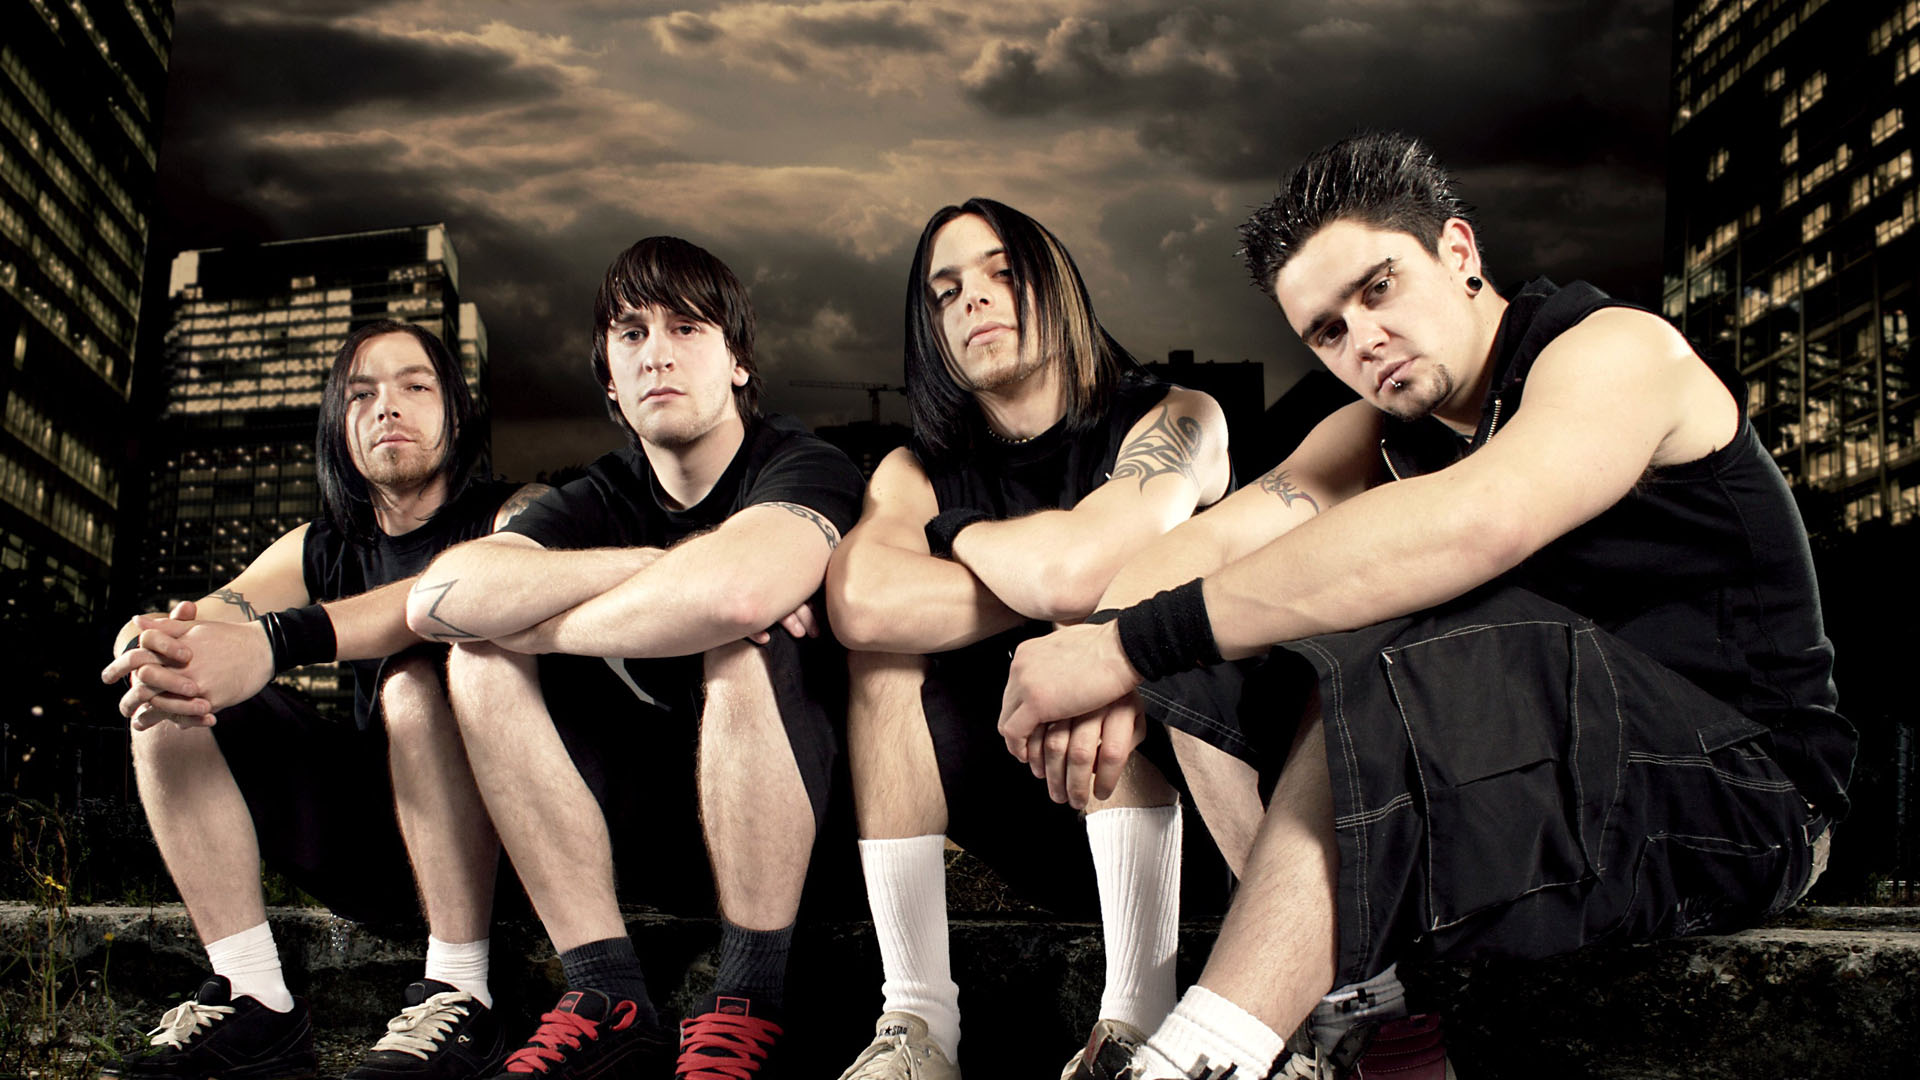 Bullet For My Valentine Wall Paper Wallpapers